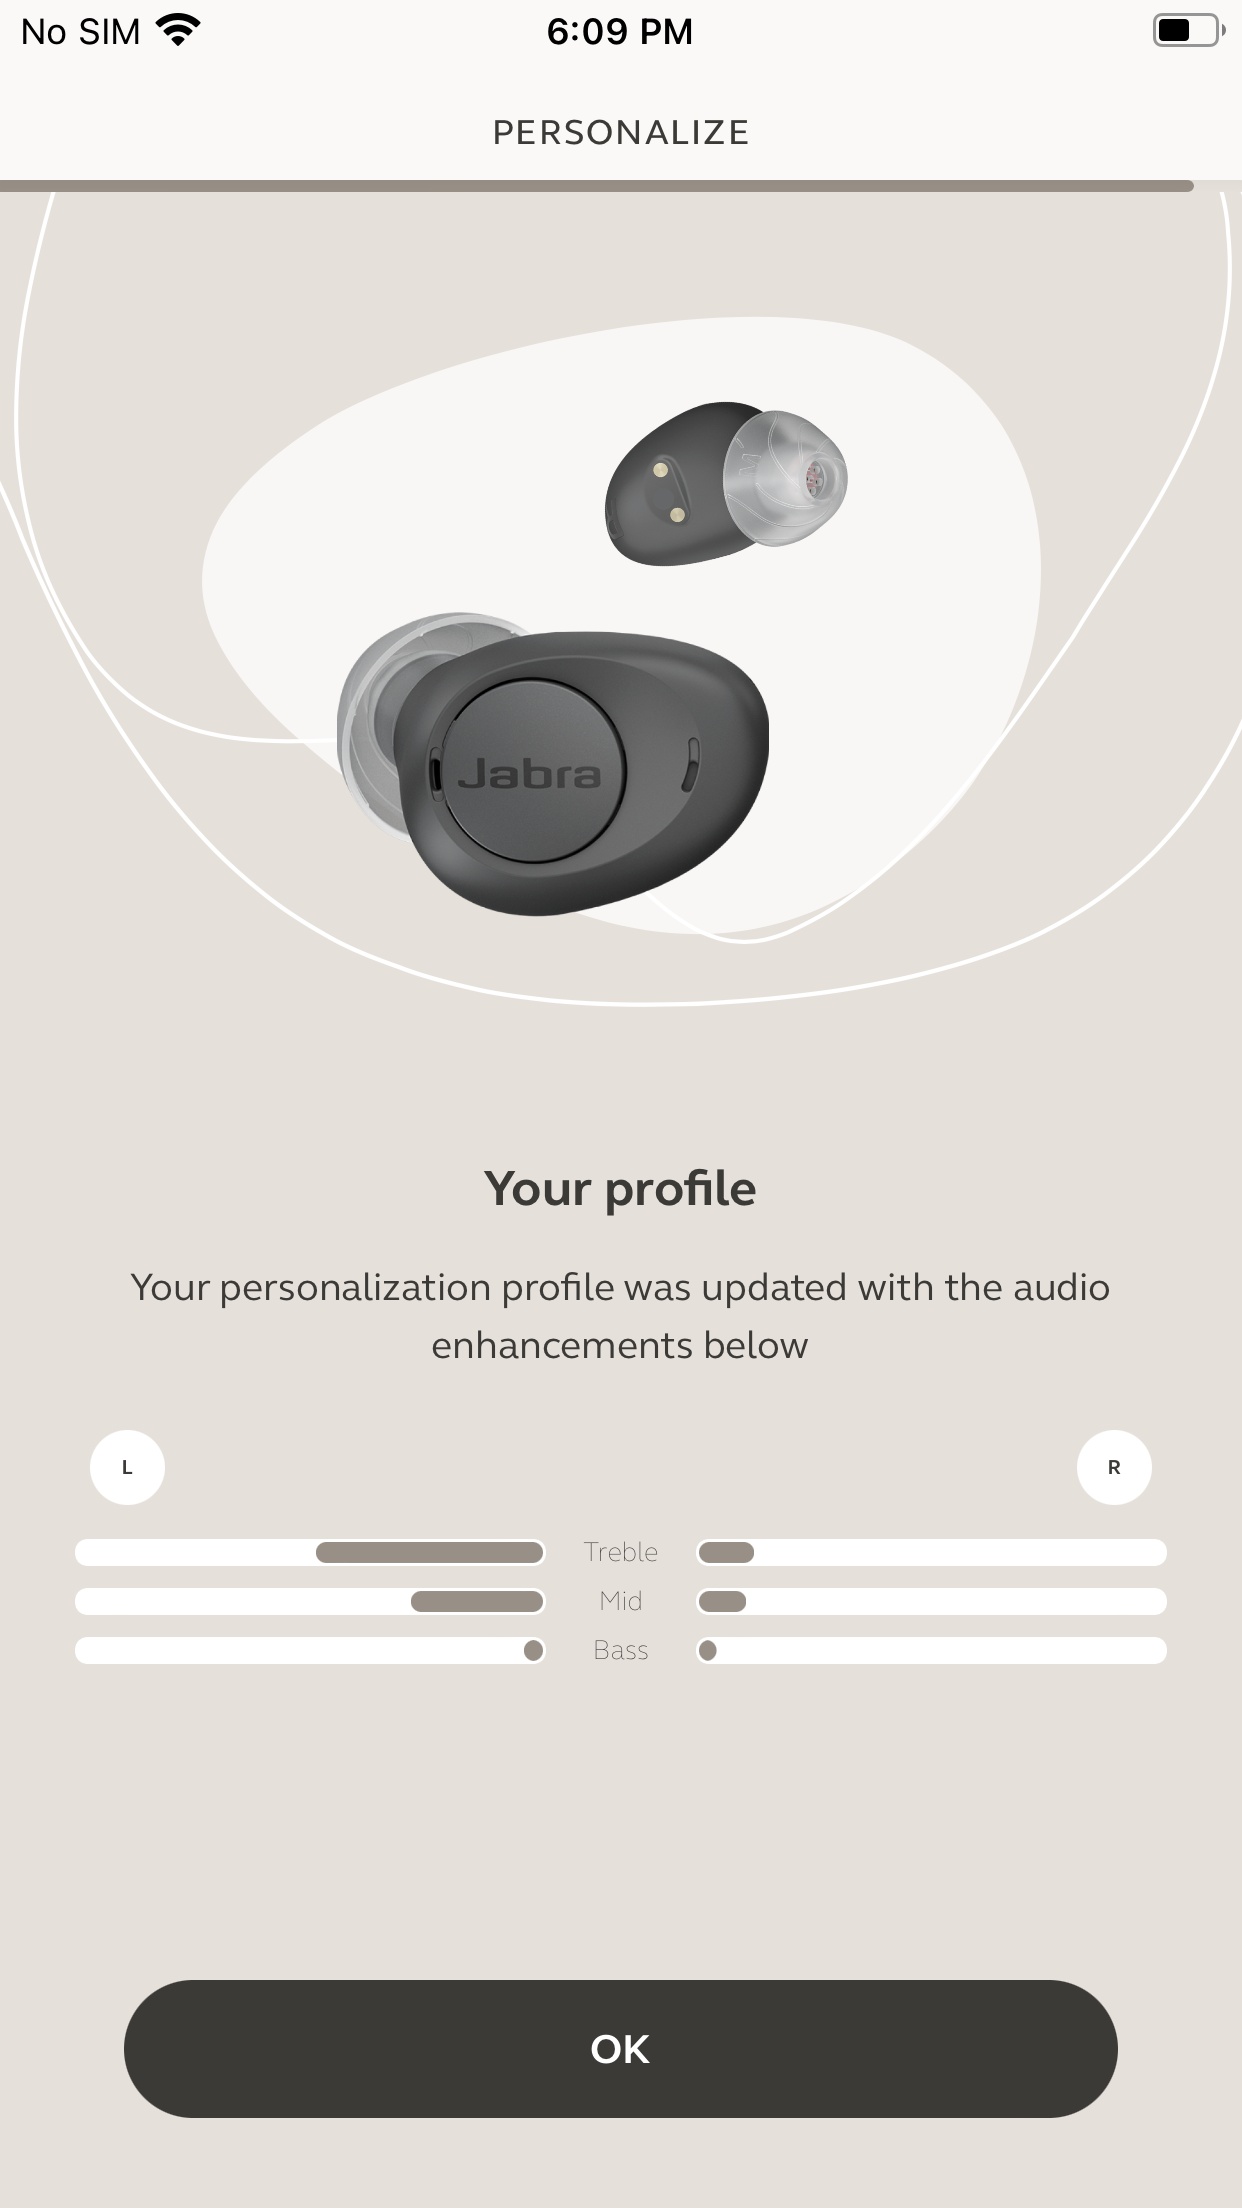 The personalization profile in the Jabra Enhance app.